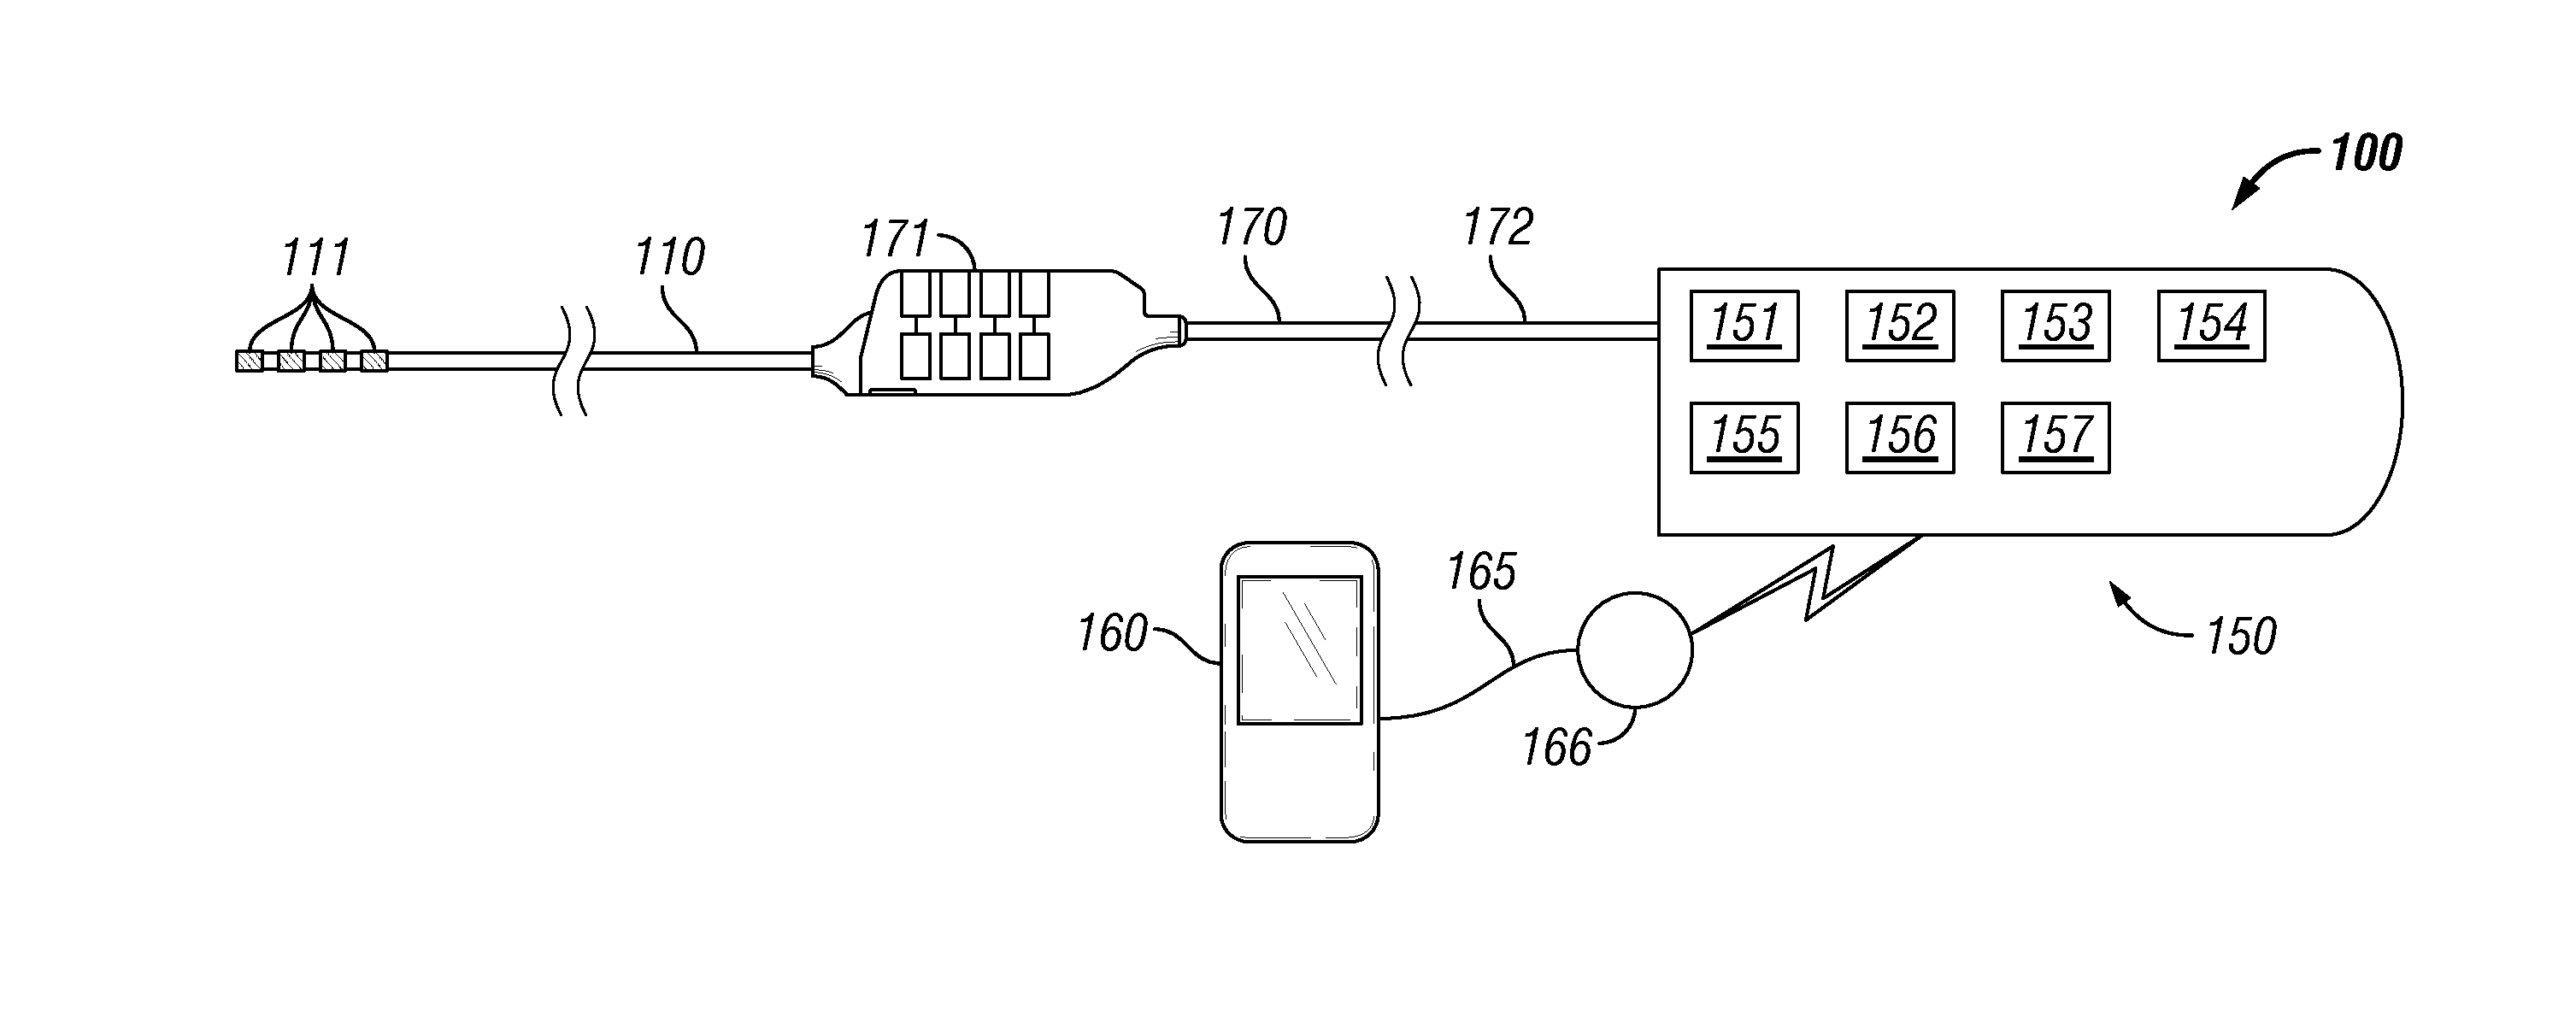 External systems for detecting implantable neurostimulation leads and devices, and methods of using same